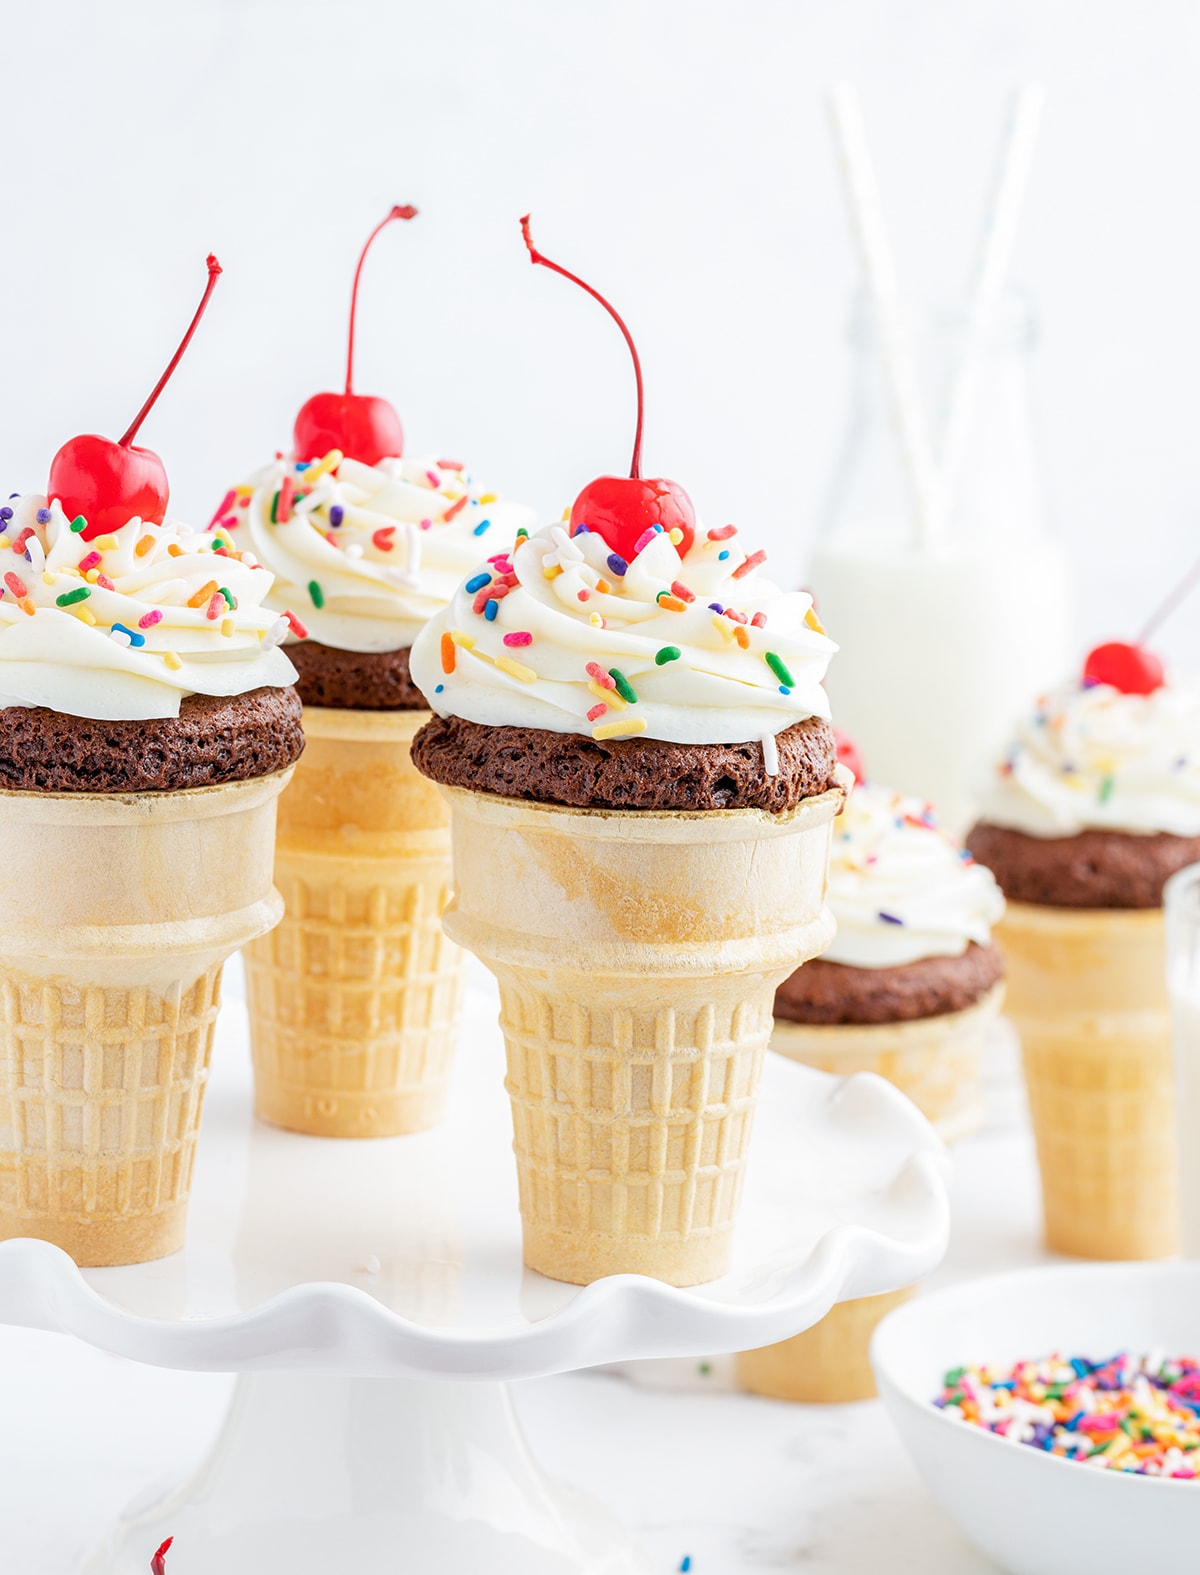 Chocolate cupcakes baked in ice cream cones and topped with frosting to look like an ice cream cone with a cherry on top.